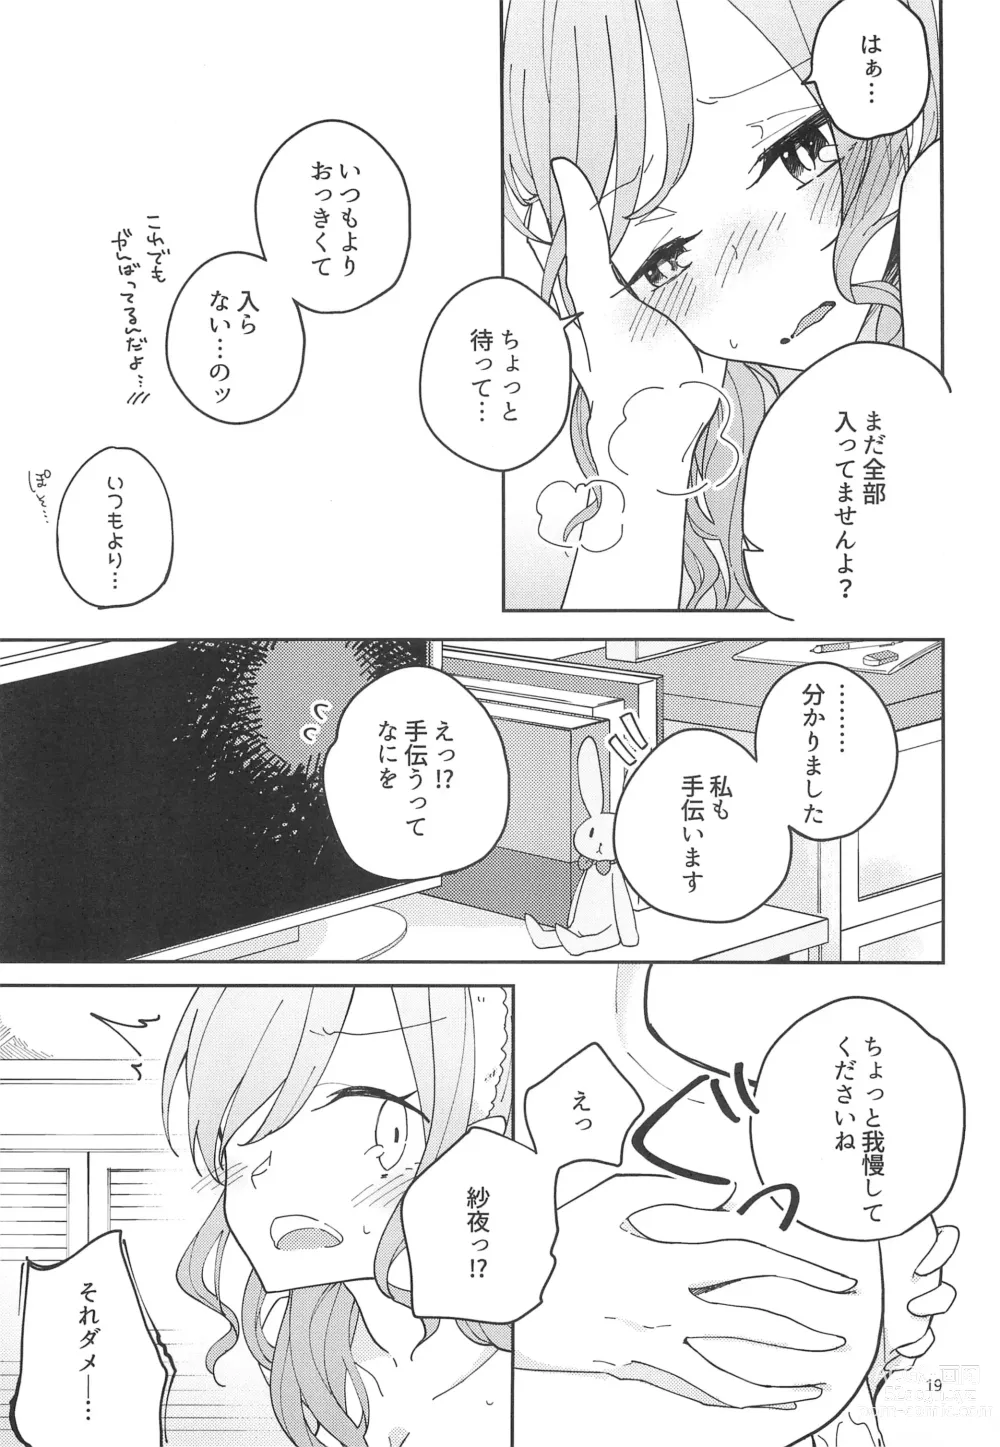 Page 21 of doujinshi I’m crazy about you.